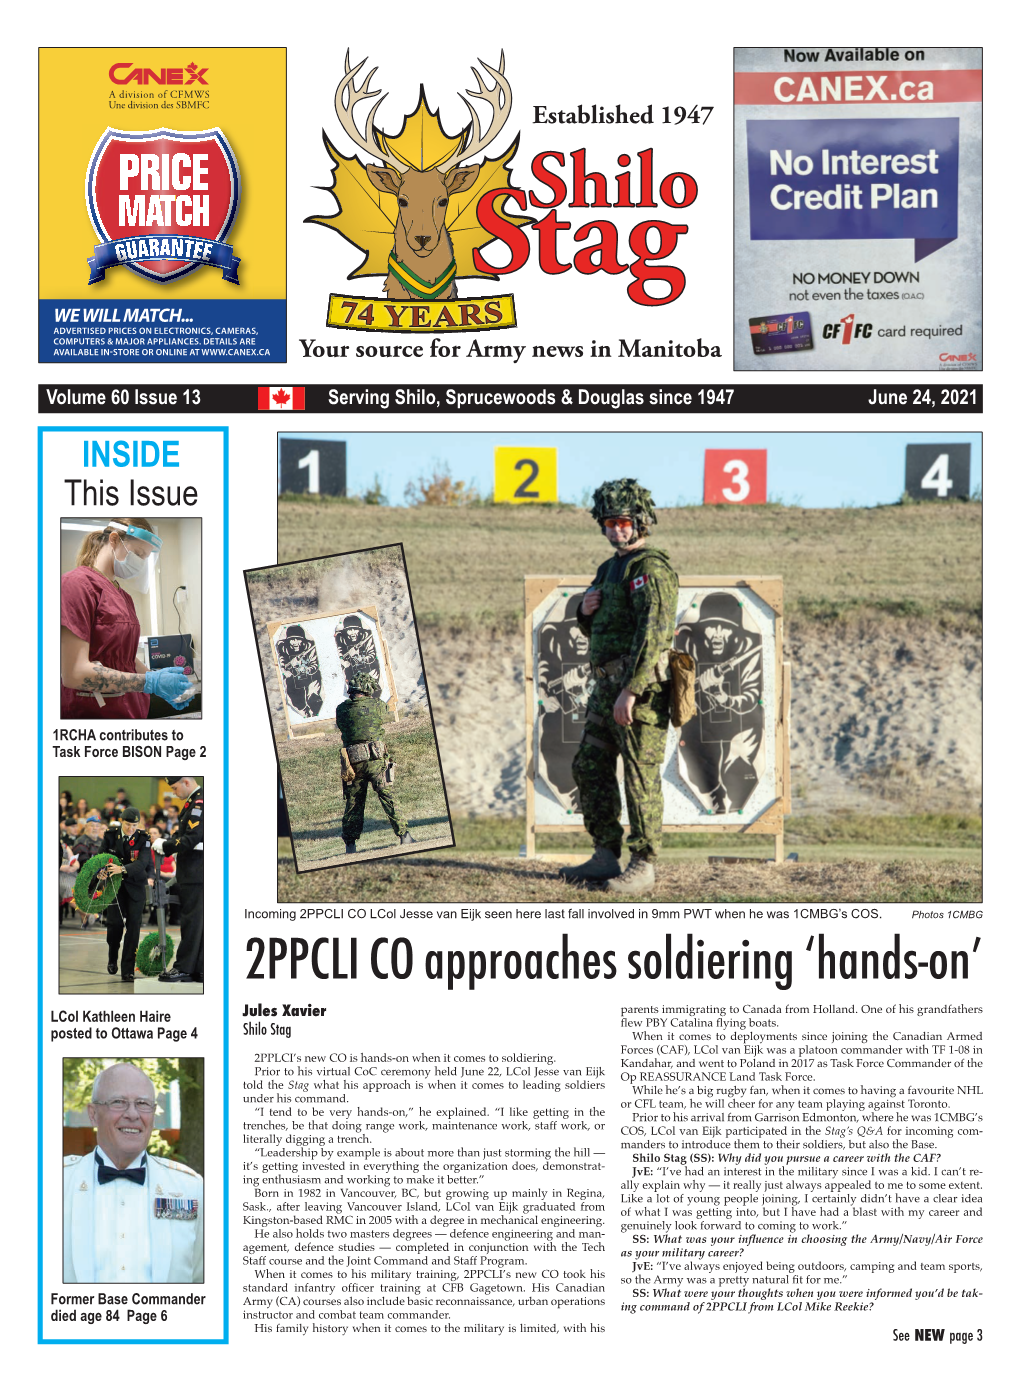 2PPCLI CO Approaches Soldiering ʻhands-Onʼ